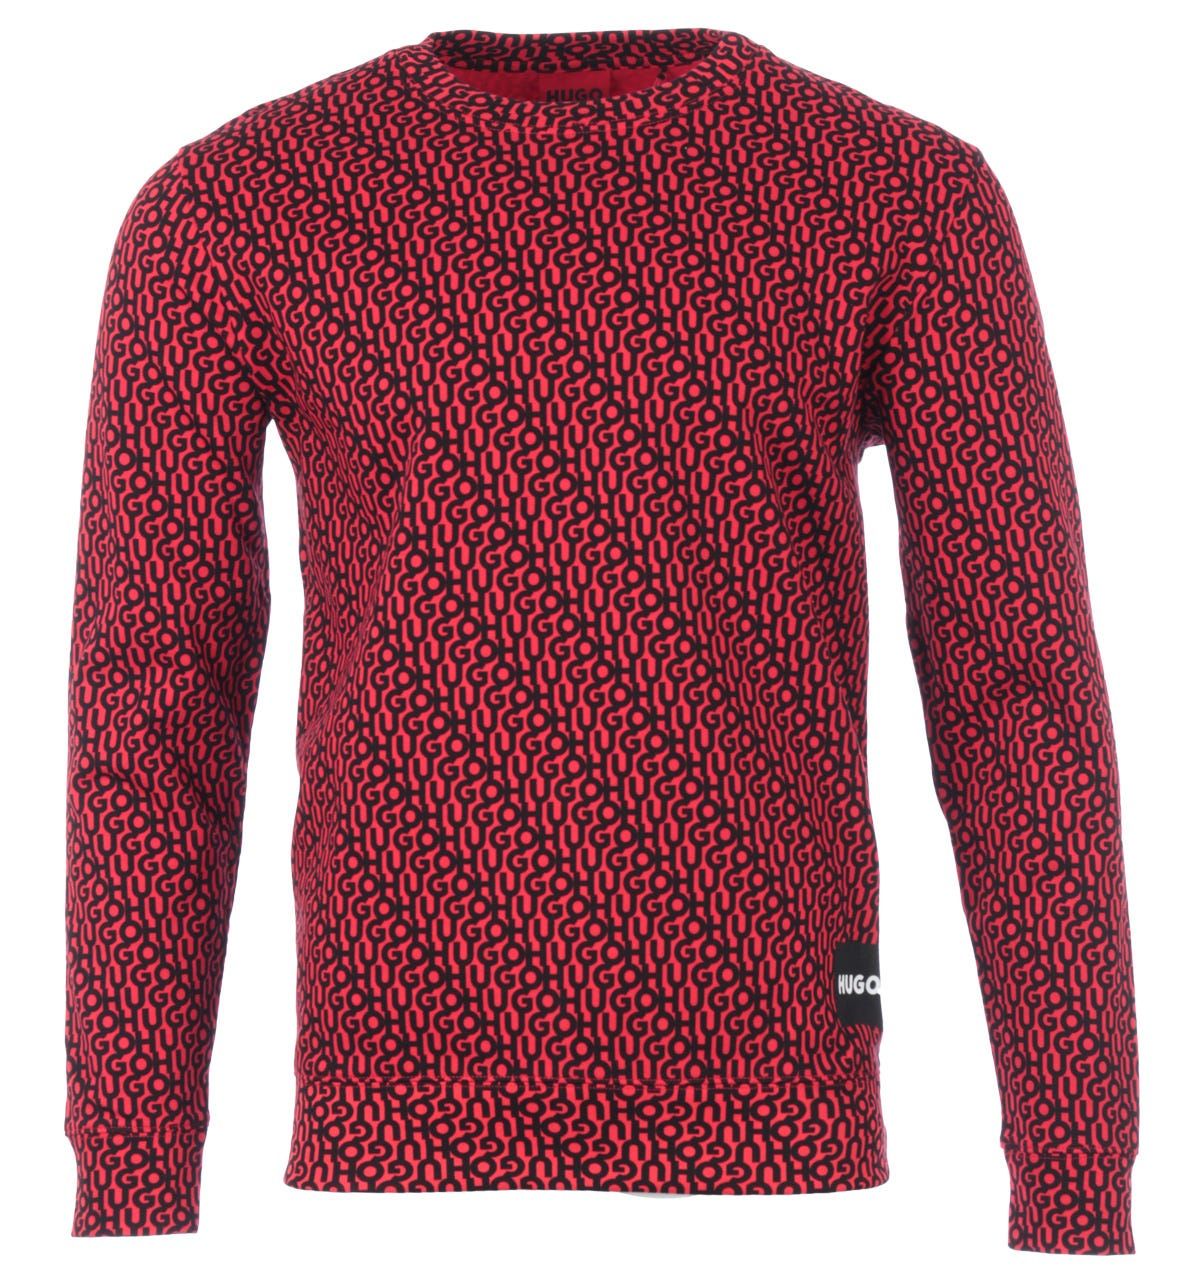 Upgrade your wardrobe essentials with the Donnery Sweatshirt from the HUGO Clean up your Act collection. Crafted from pure sustainably sourced cotton. Featuring a classic crew neck design with ribbed trims. Finished with the iconic red HUGO logo in an allover print.\nRegular Fit, Pure Sustainable Sourced Cotton, Classic Crew Neck, Ribbed Trims, All Over HUGO Print, HUGO Branding. Style & Fit:Regular Fit, Fits True to Size. Composition & Care:100% Cotton, Machine Wash.